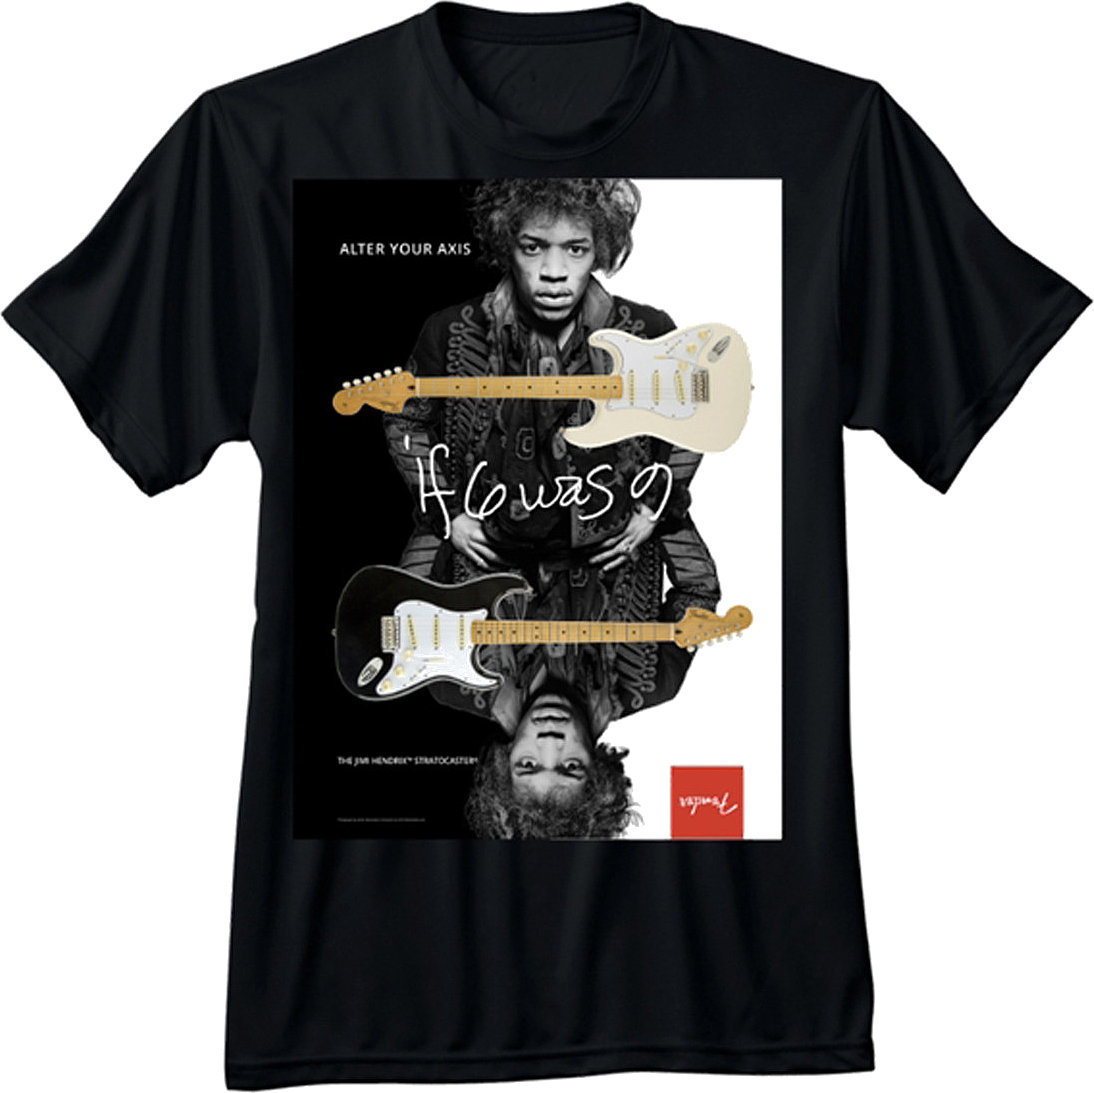 Paita Fender Jimi Hendrix Collection Alter Your Axis T-Shirt Black L